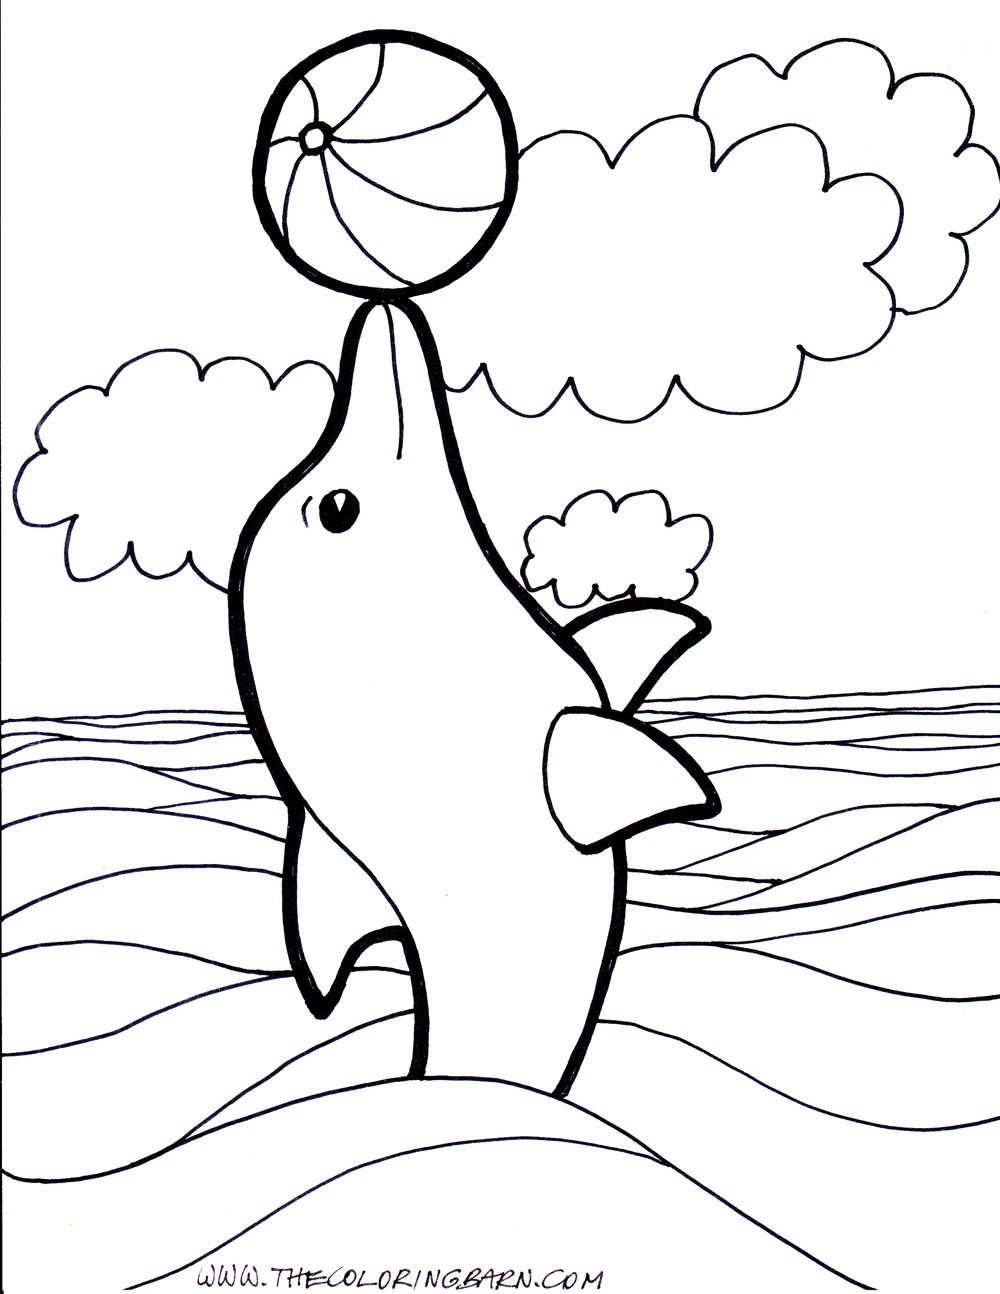 Dolphin Coloring Pages To Print | Dolphins | The Coloring Barn - Dolphin Coloring Sheets Free Printable